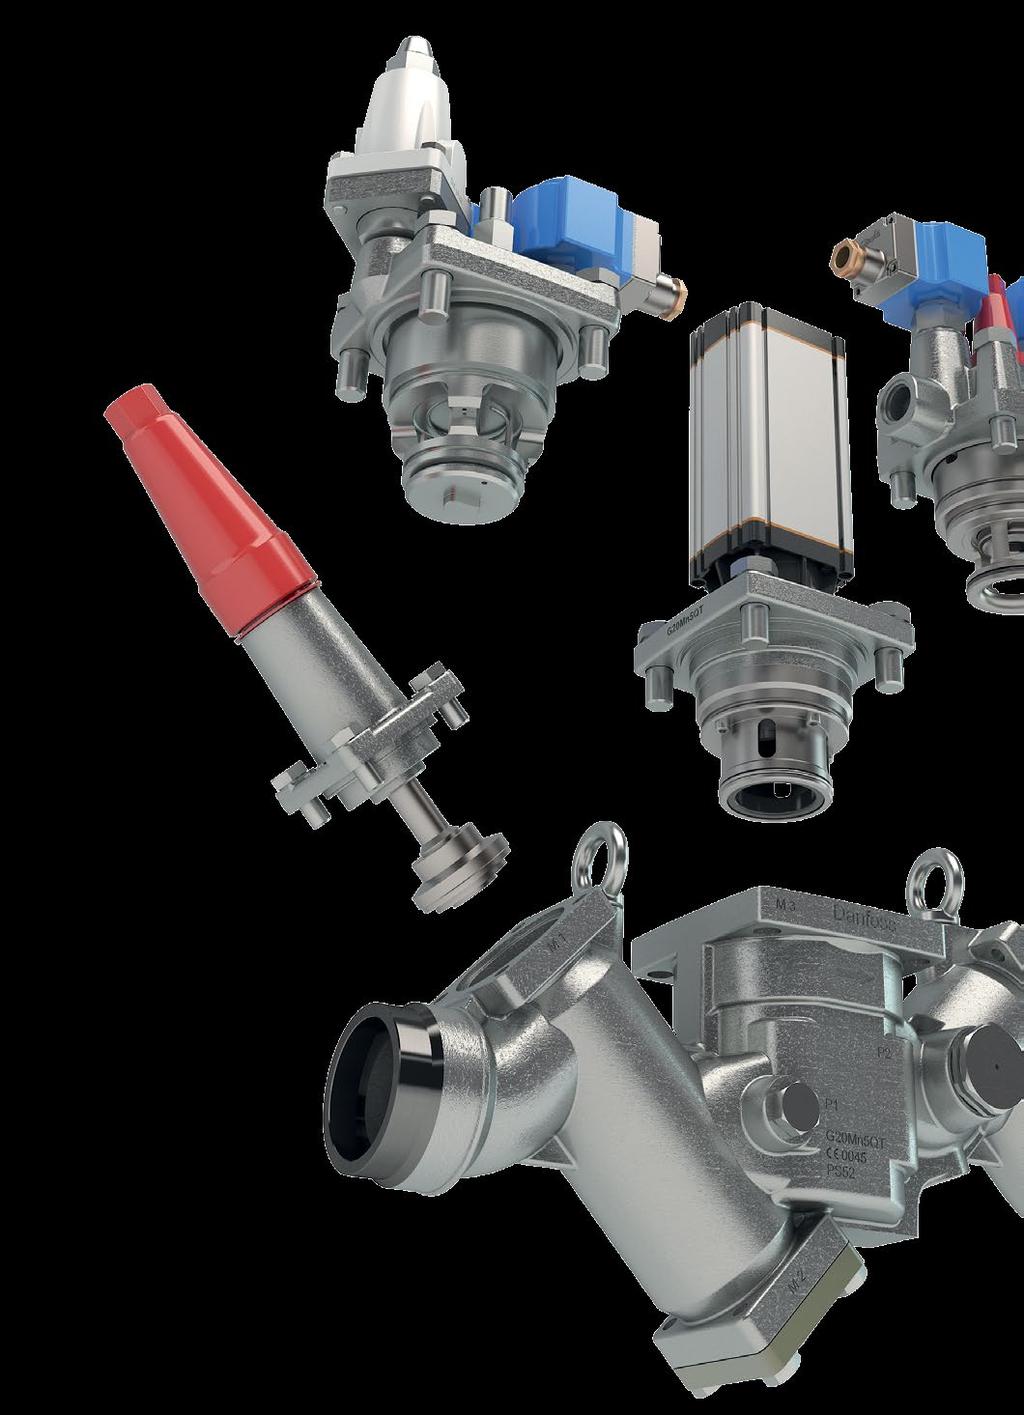 A flexible valve solution The new ICF 50-4 and ICF 65-3 fit suction lines, hot gas and defrost lines with ease.